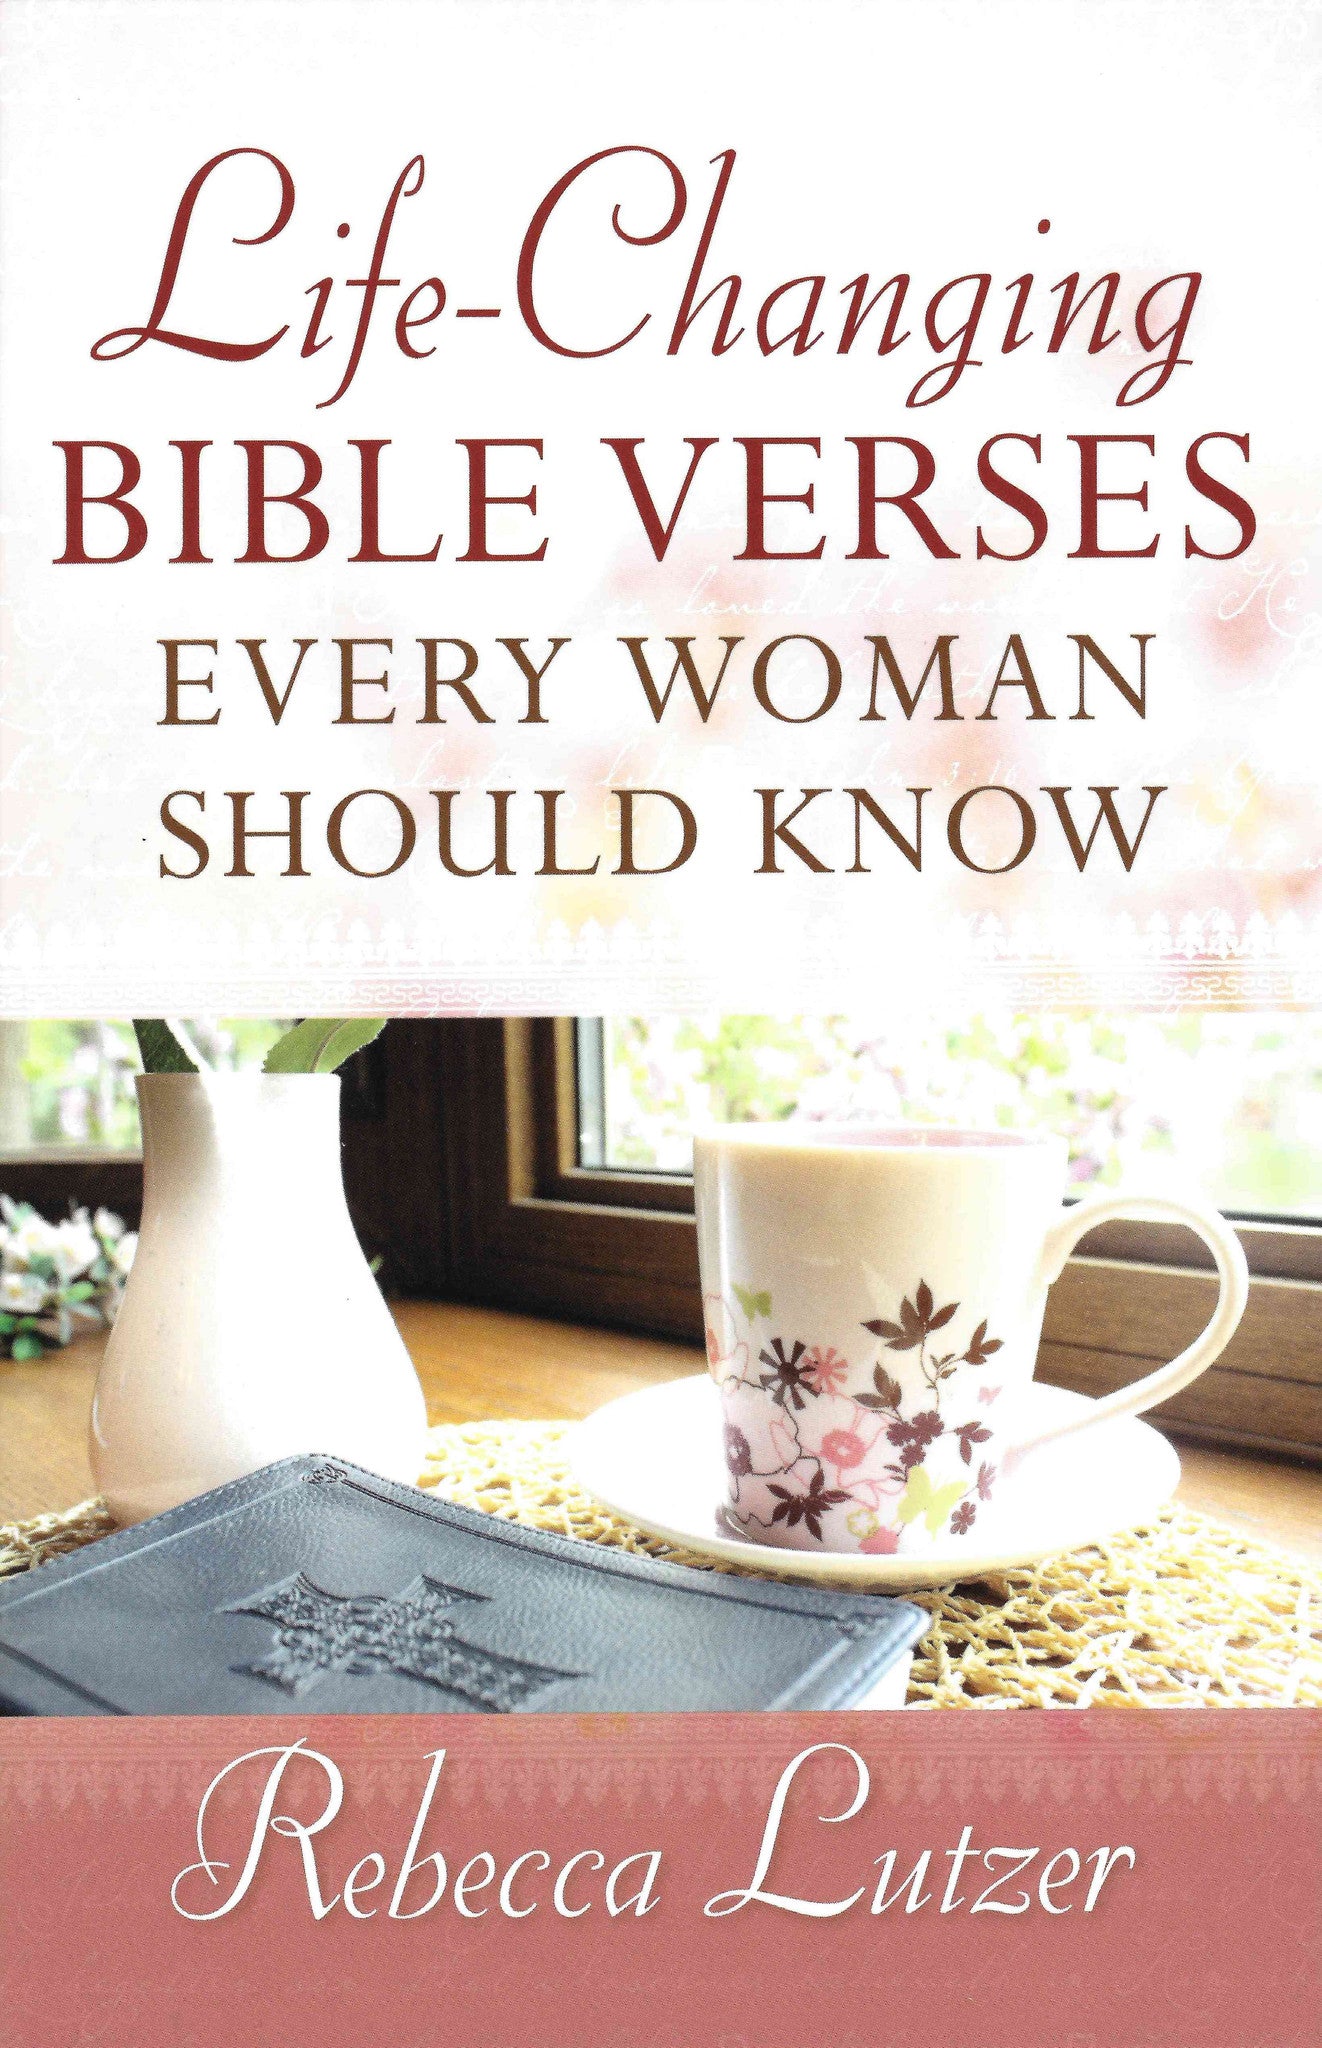 Life Changing Bible Verses Every Woman Should Know